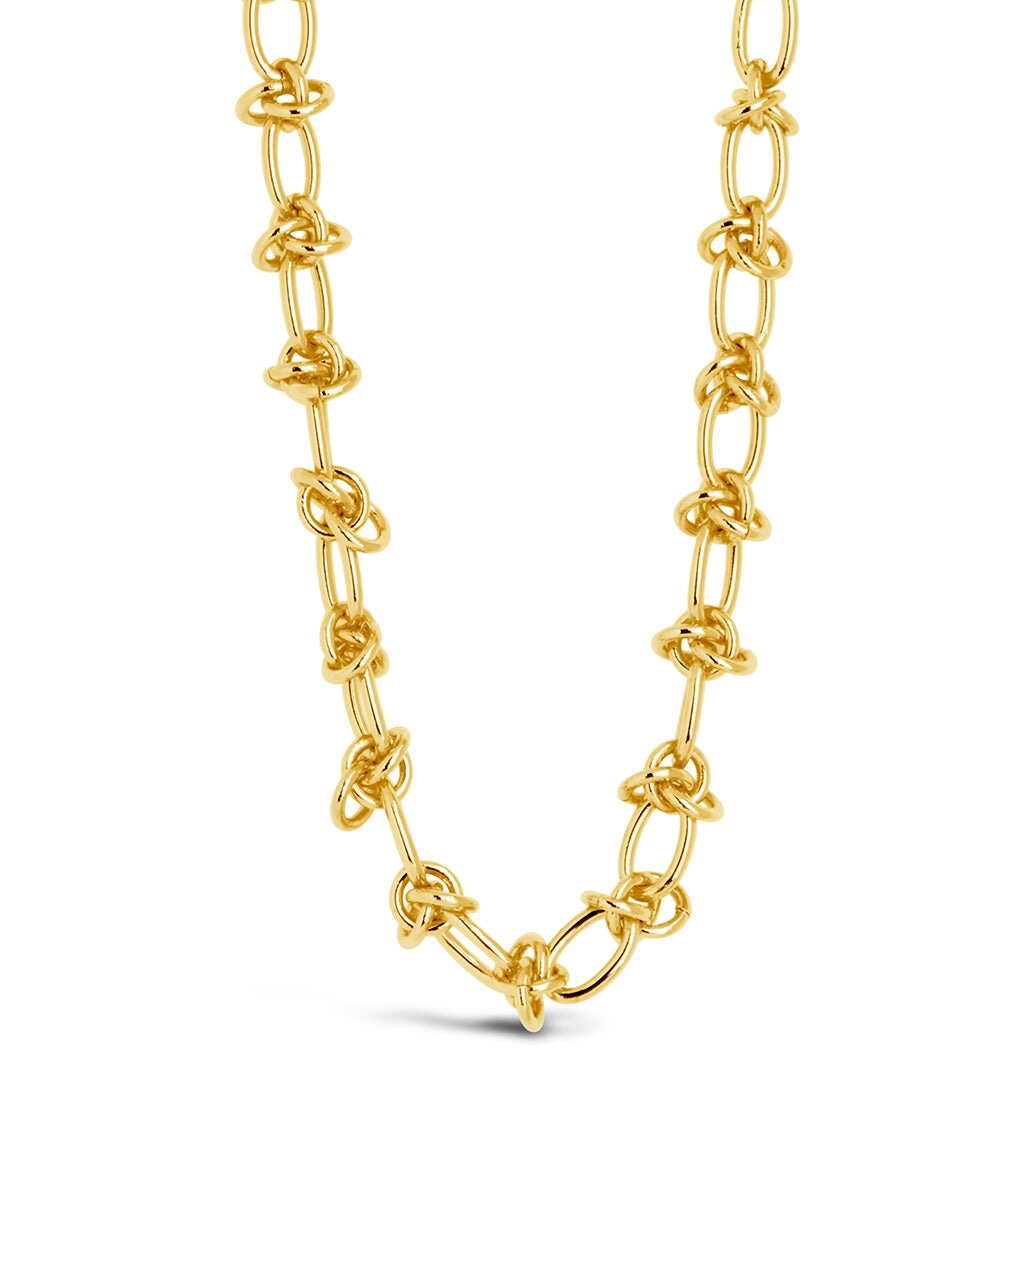 Zoya Chain Necklace Necklace Sterling Forever Gold 